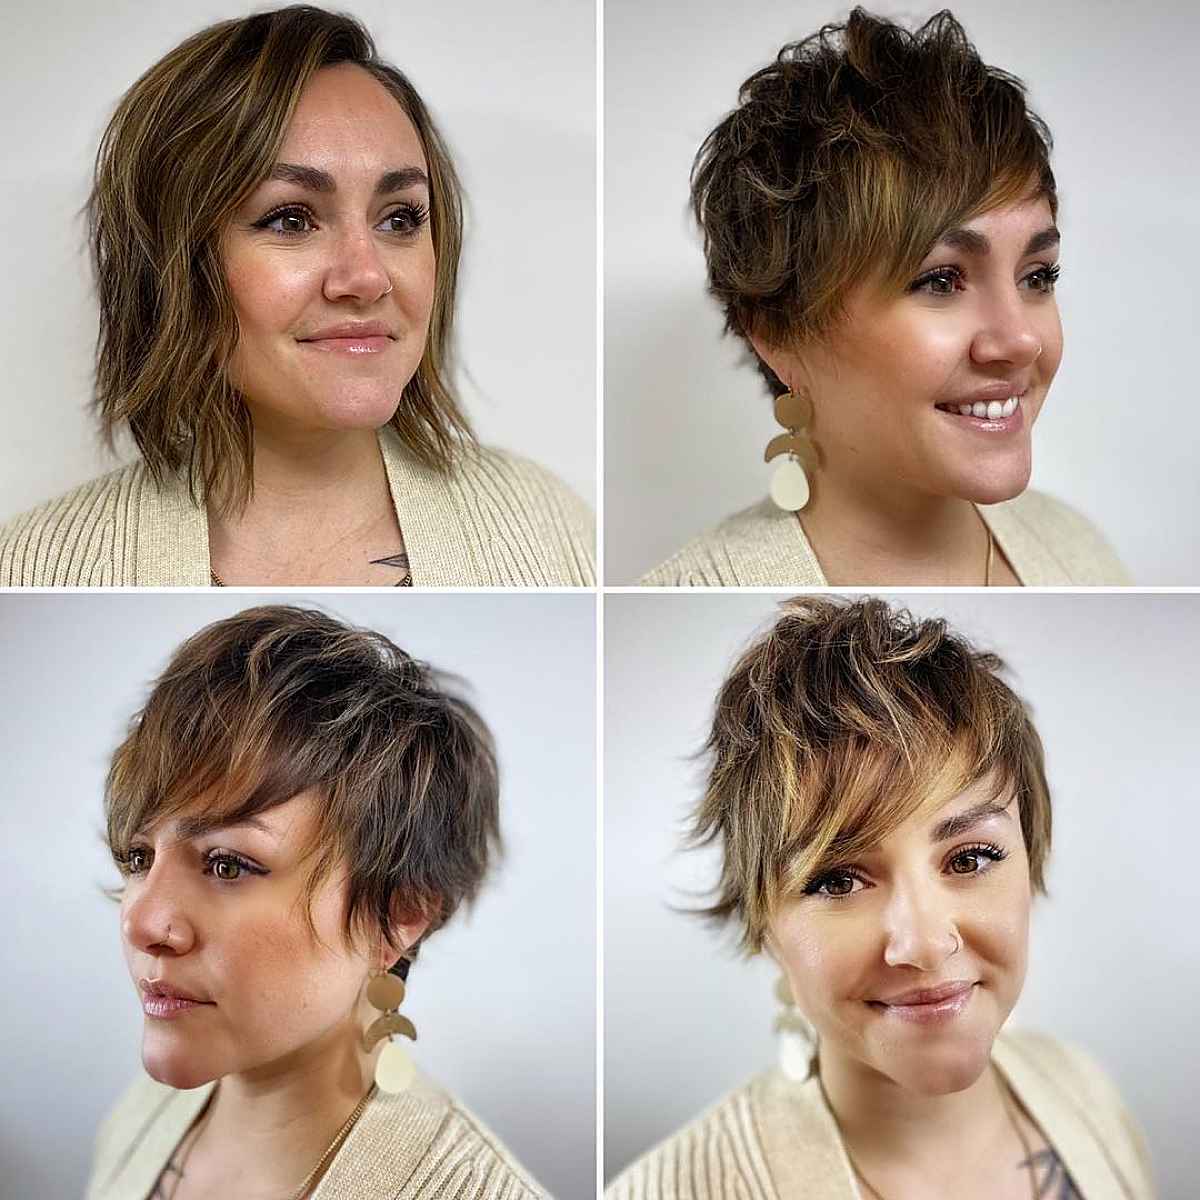 Shaggy Pixie with Side-Swept Bangs